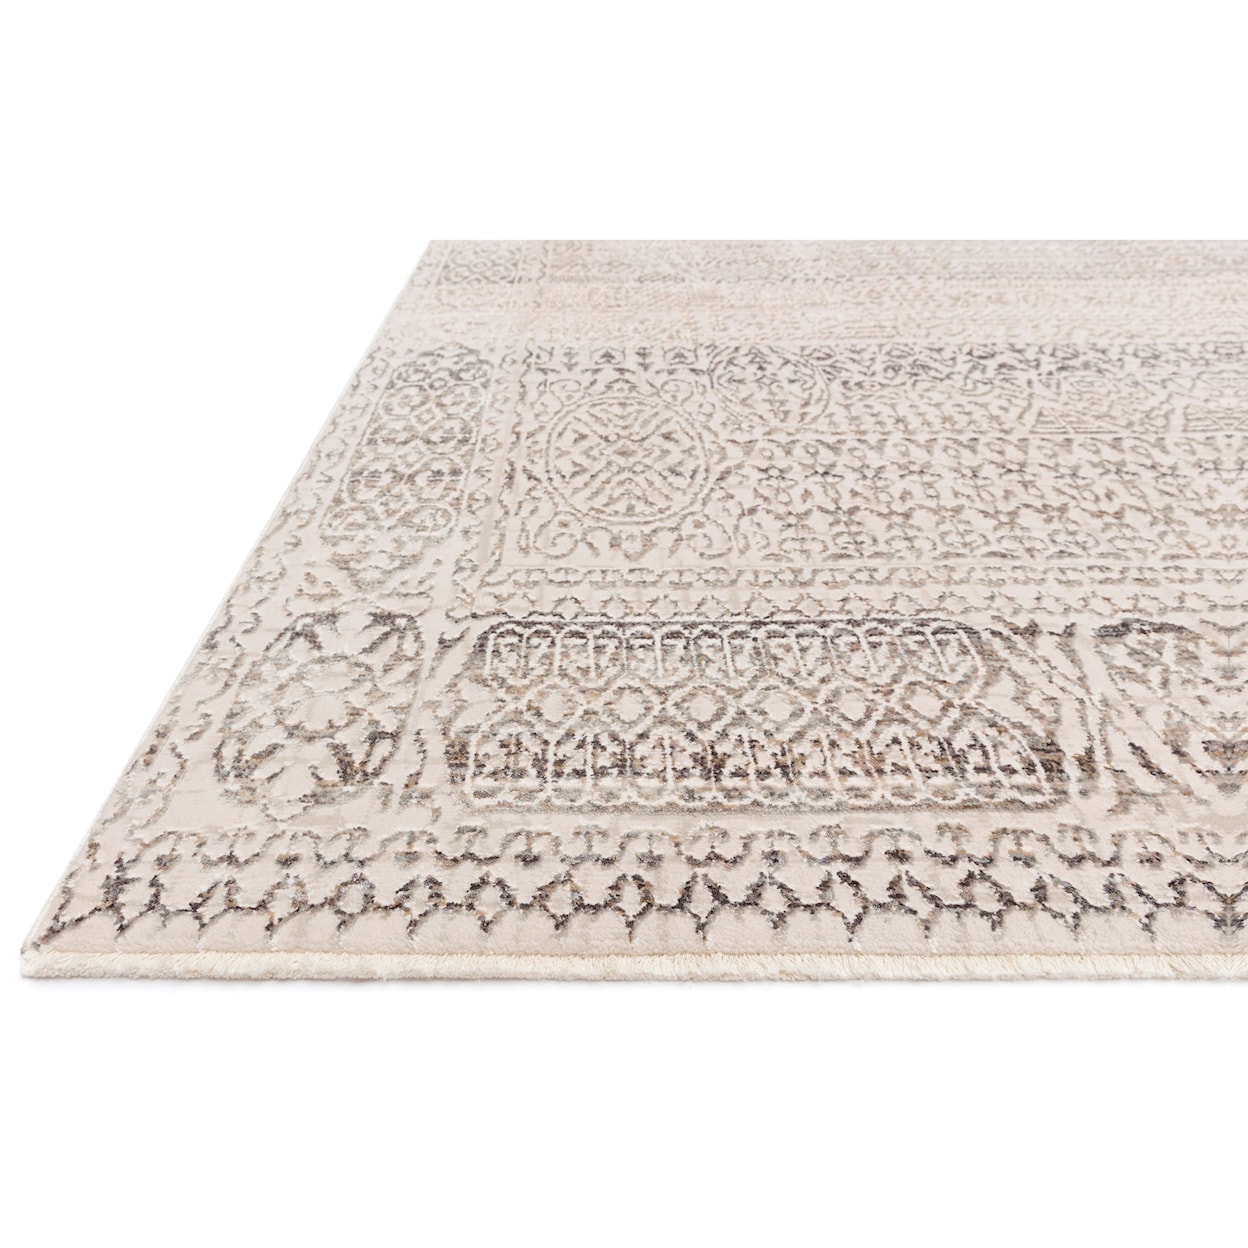 Reeds Rugs Homage 2'6" x 16'0" Ivory / Silver Rug